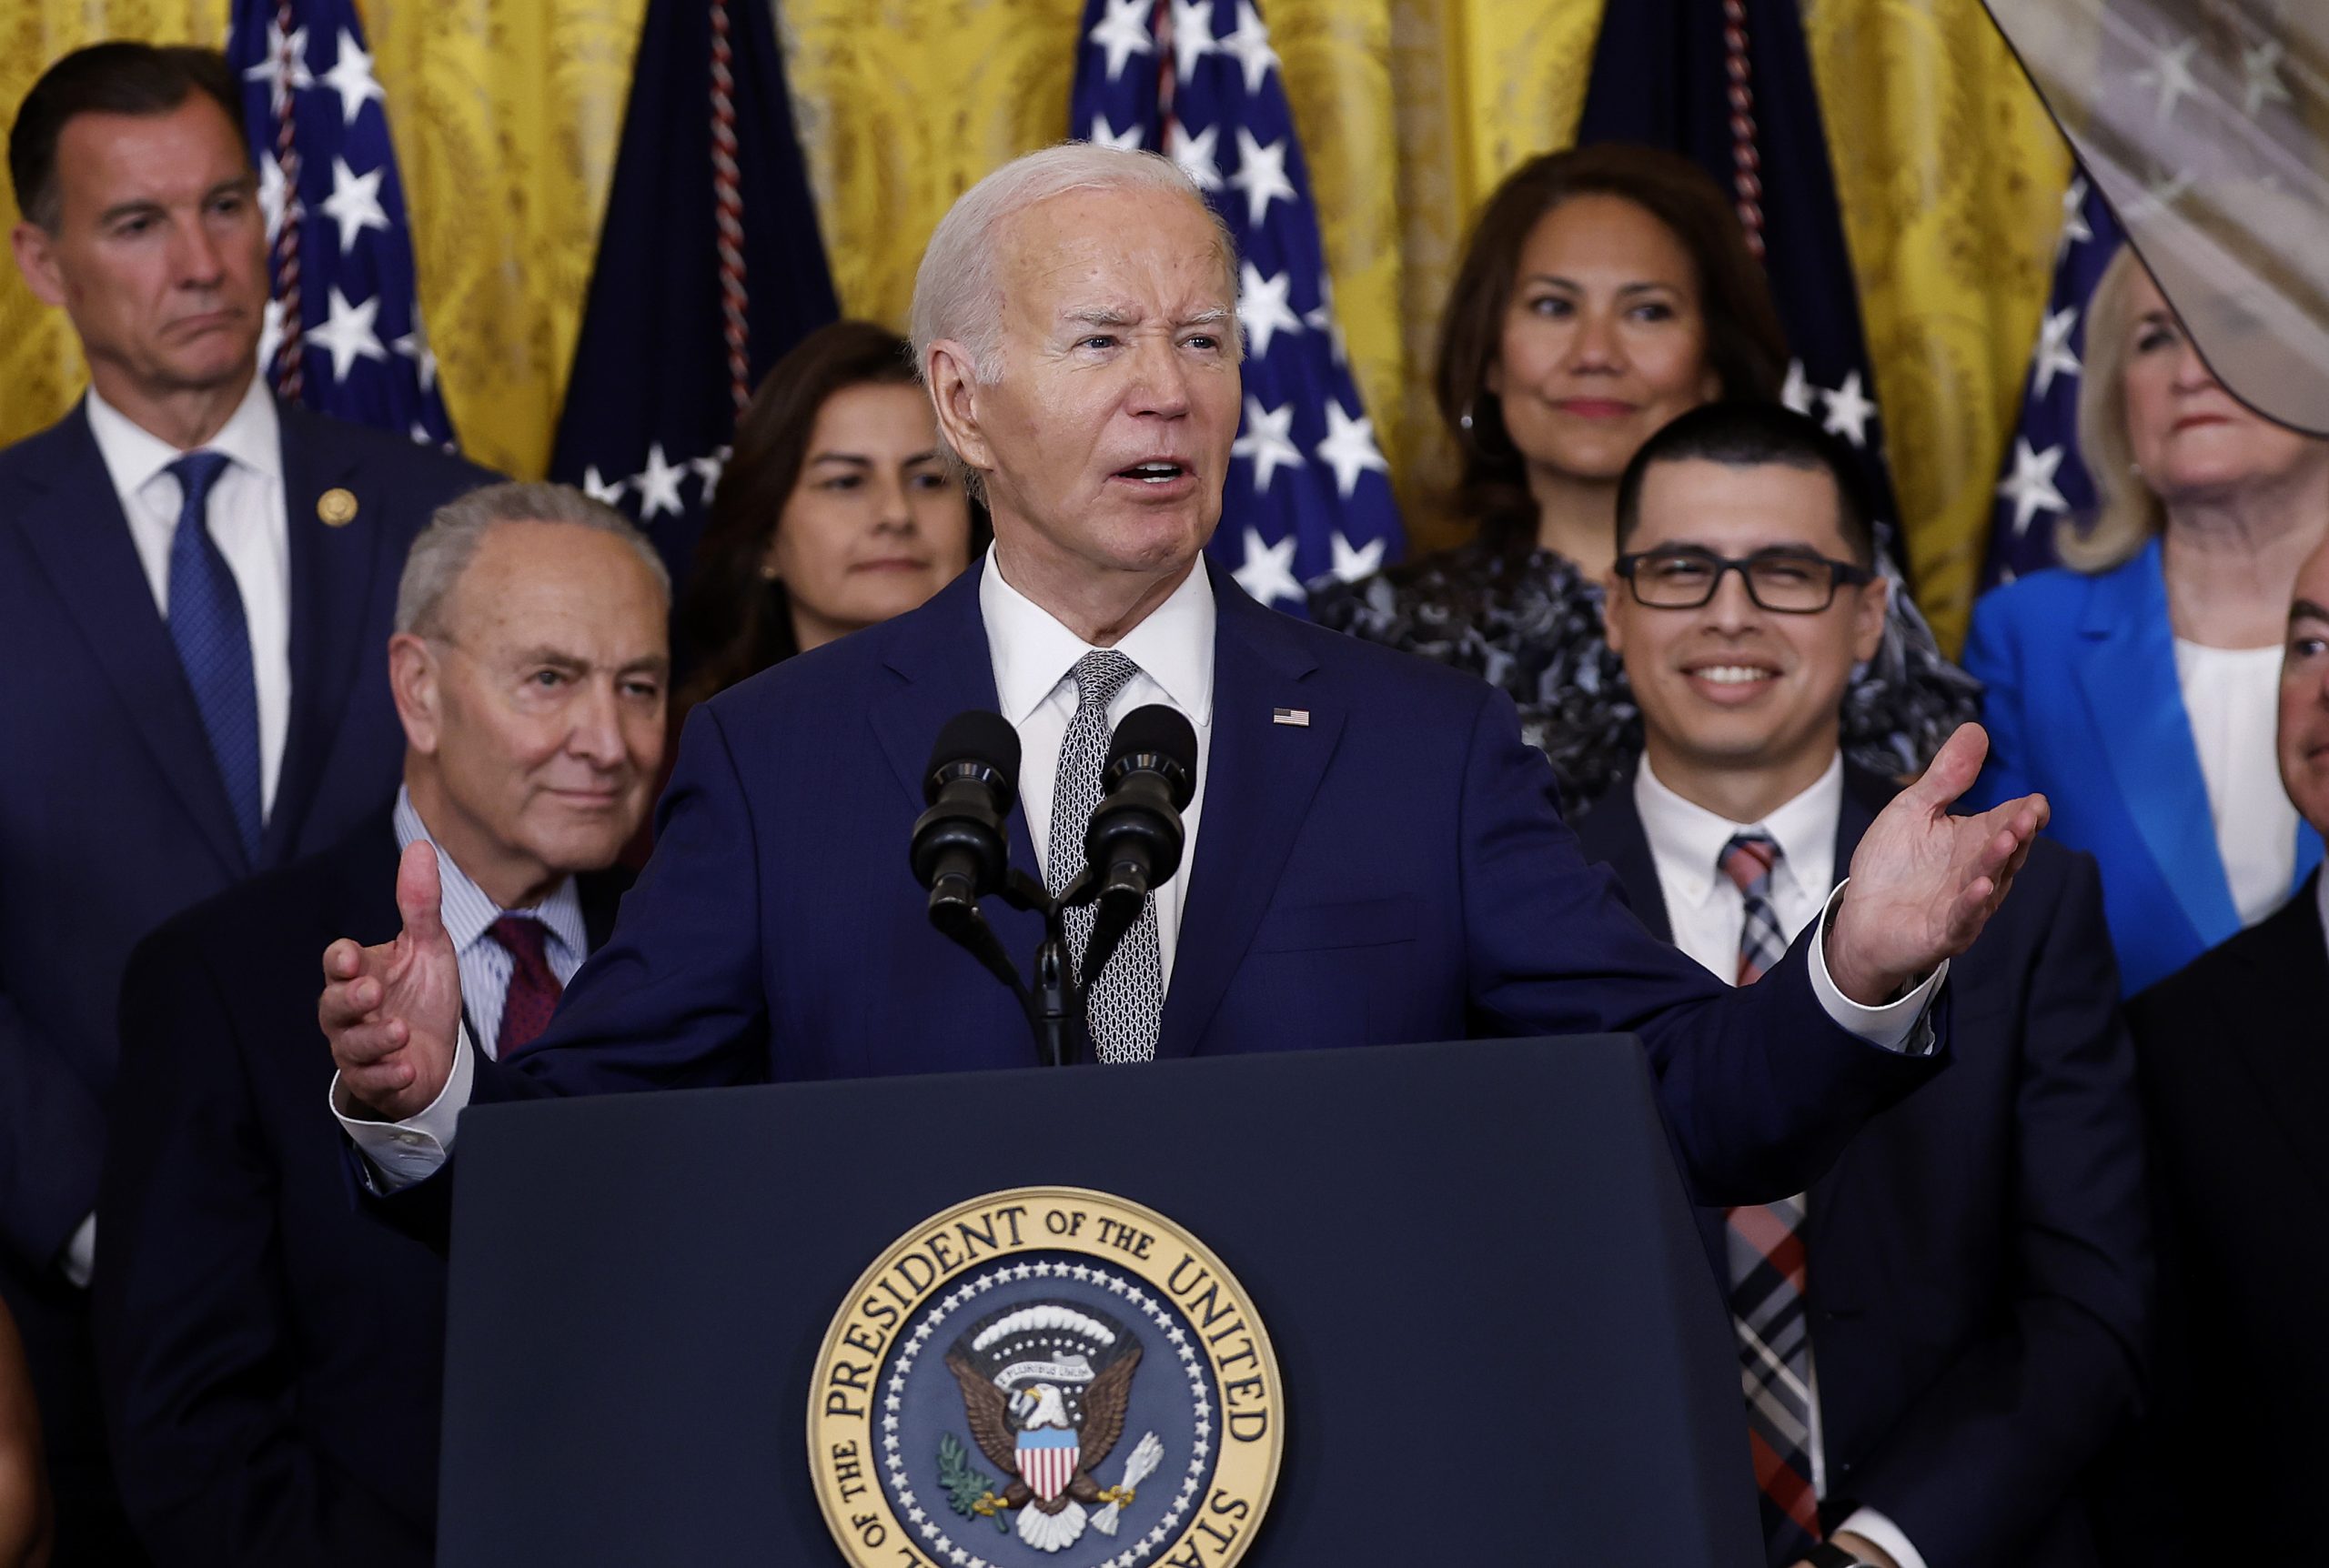 Biden Launches New Protections for Dreamers